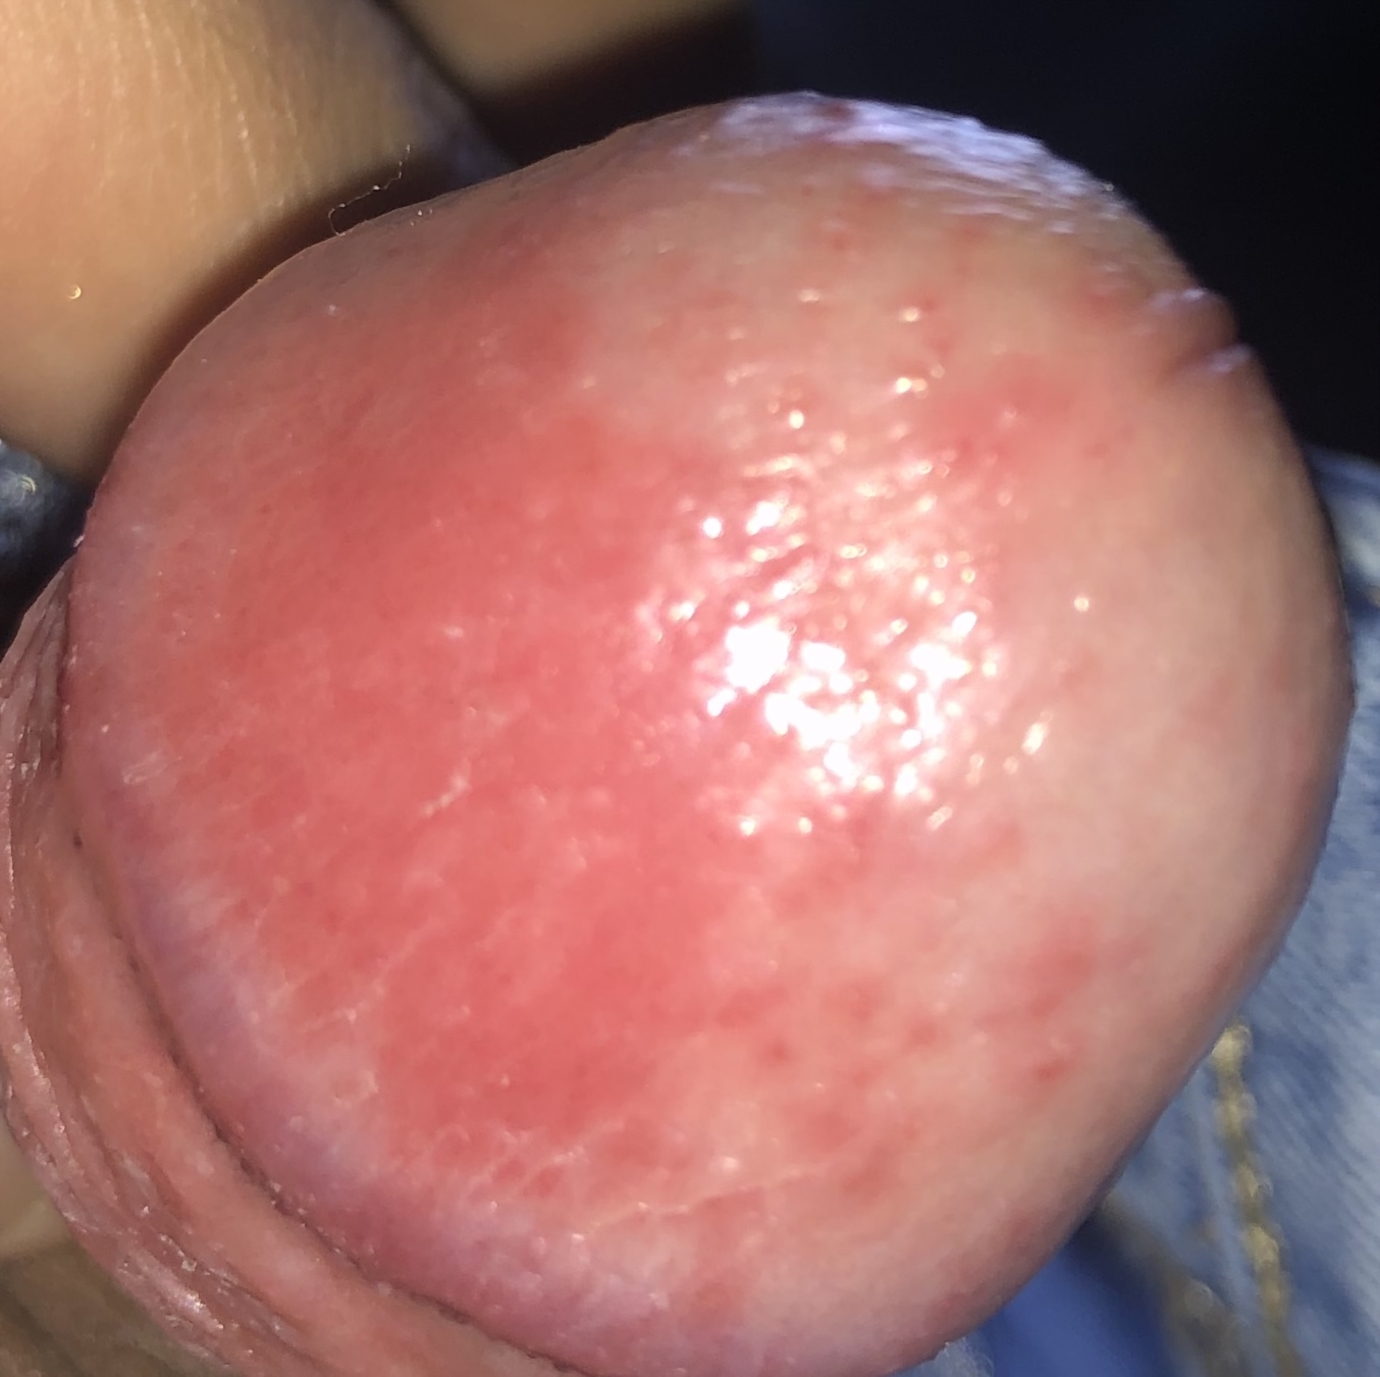 Have small red dots on my penis